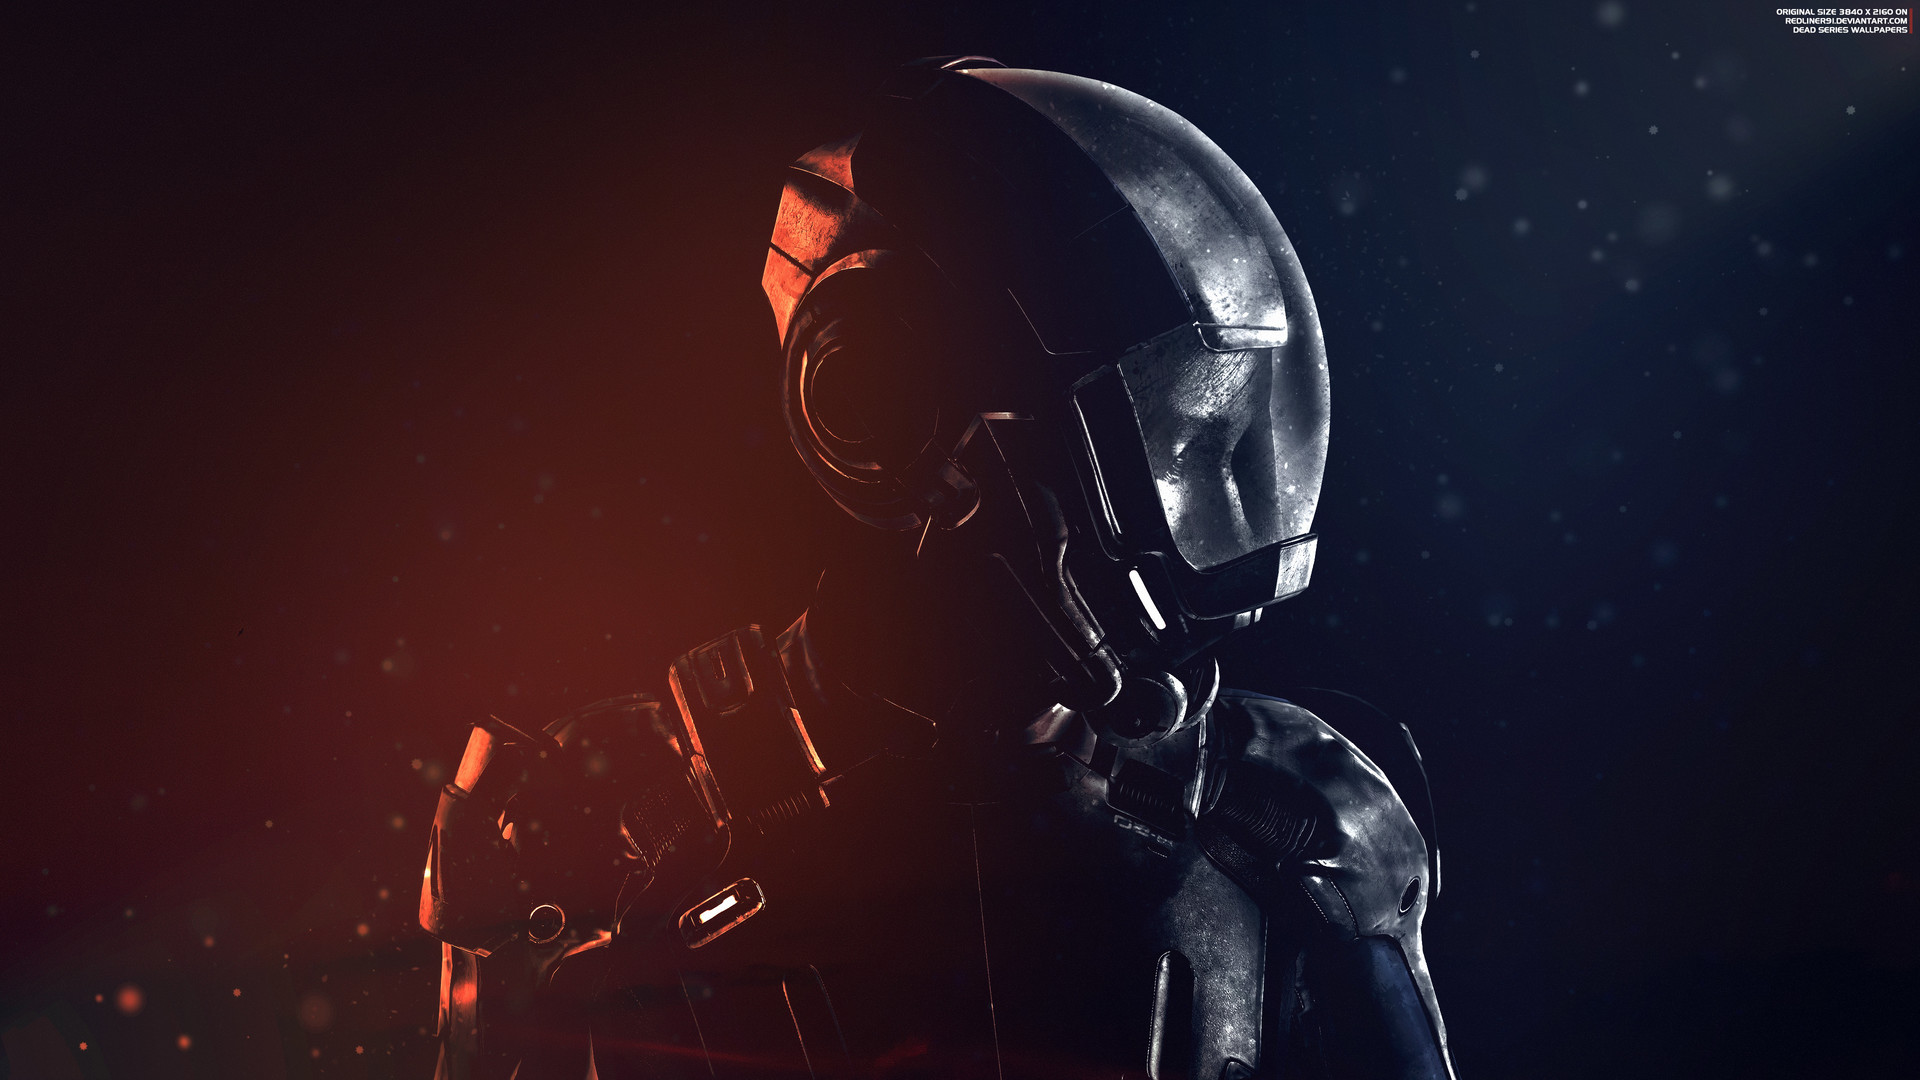 Mass Effect Andromeda Backgrounds